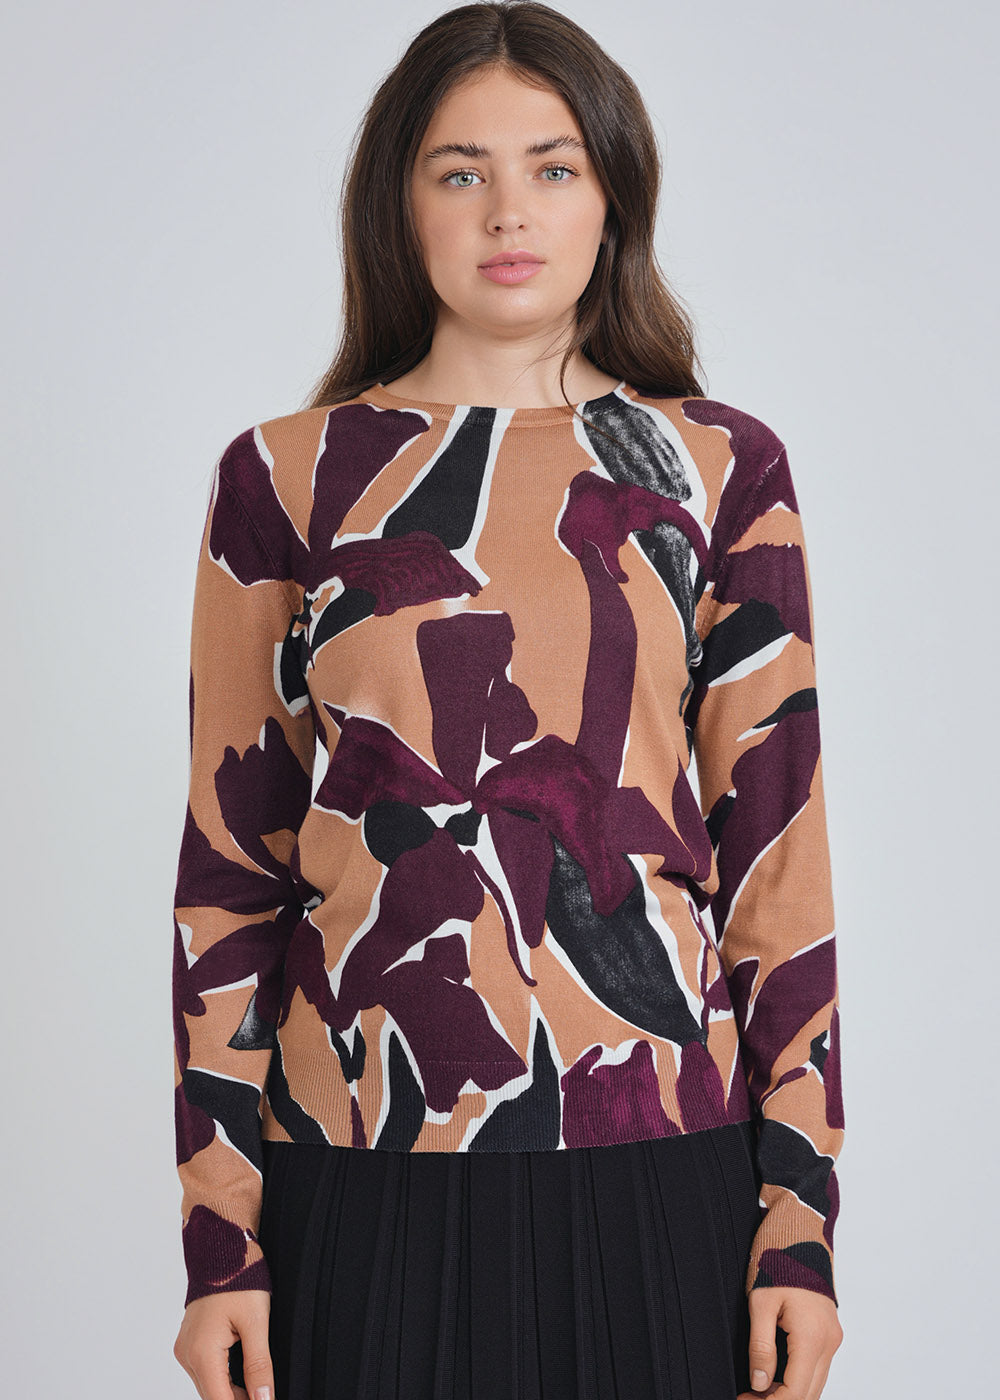 Abstract Burgundy Camel Knit Top